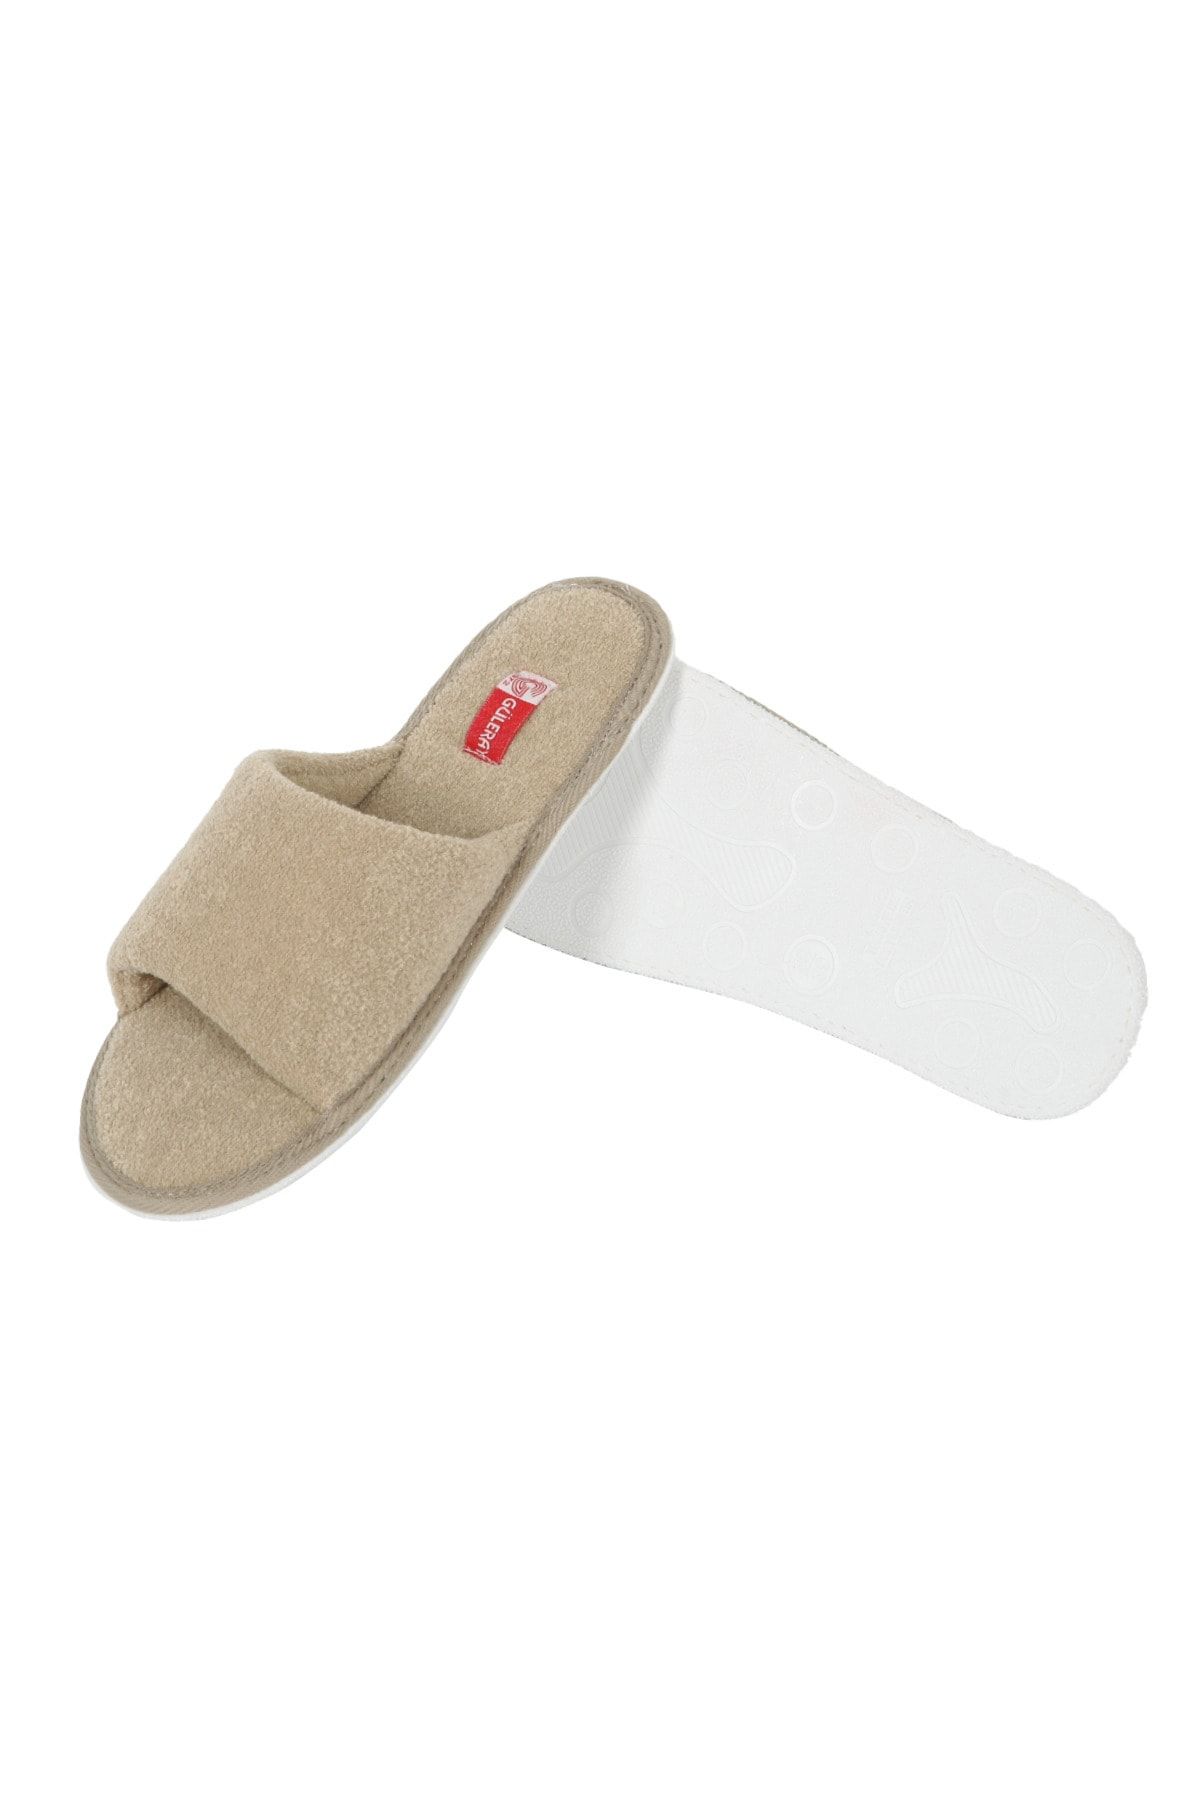 Disposable propylene hotel slippers for bathroom and room